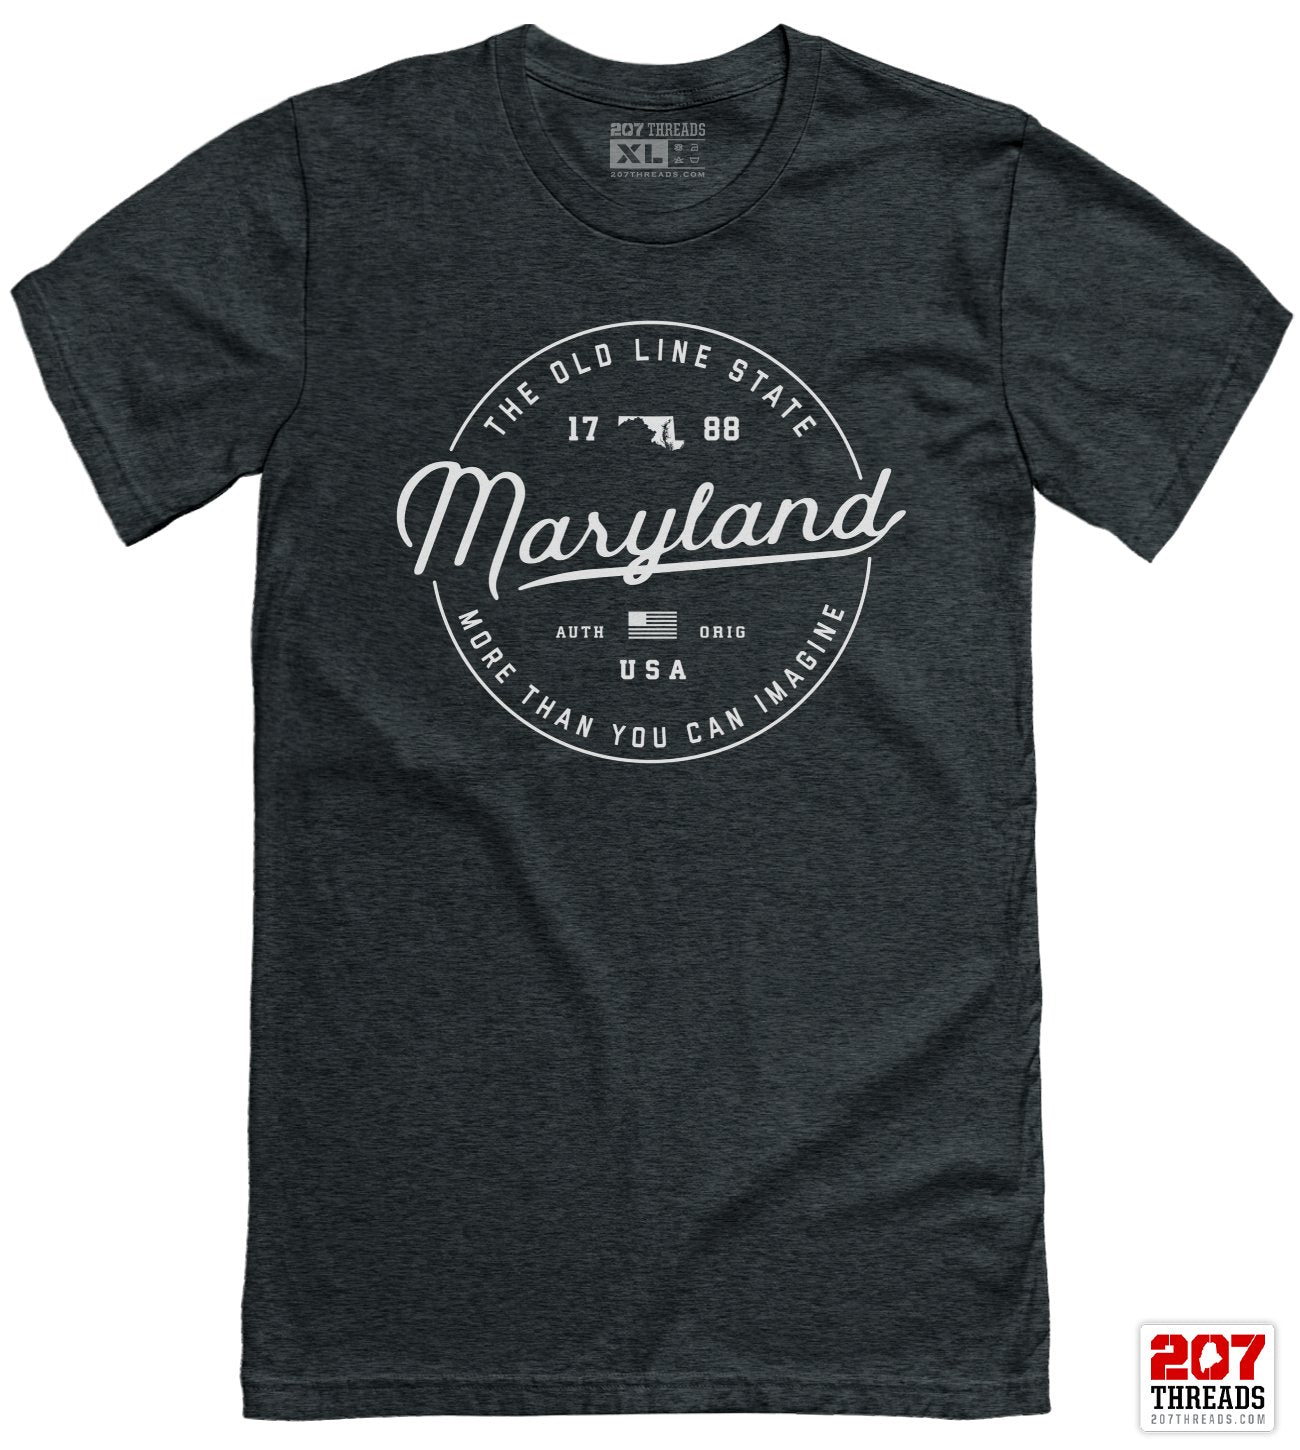 State of Maryland T-Shirt - Soft Maryland Tee